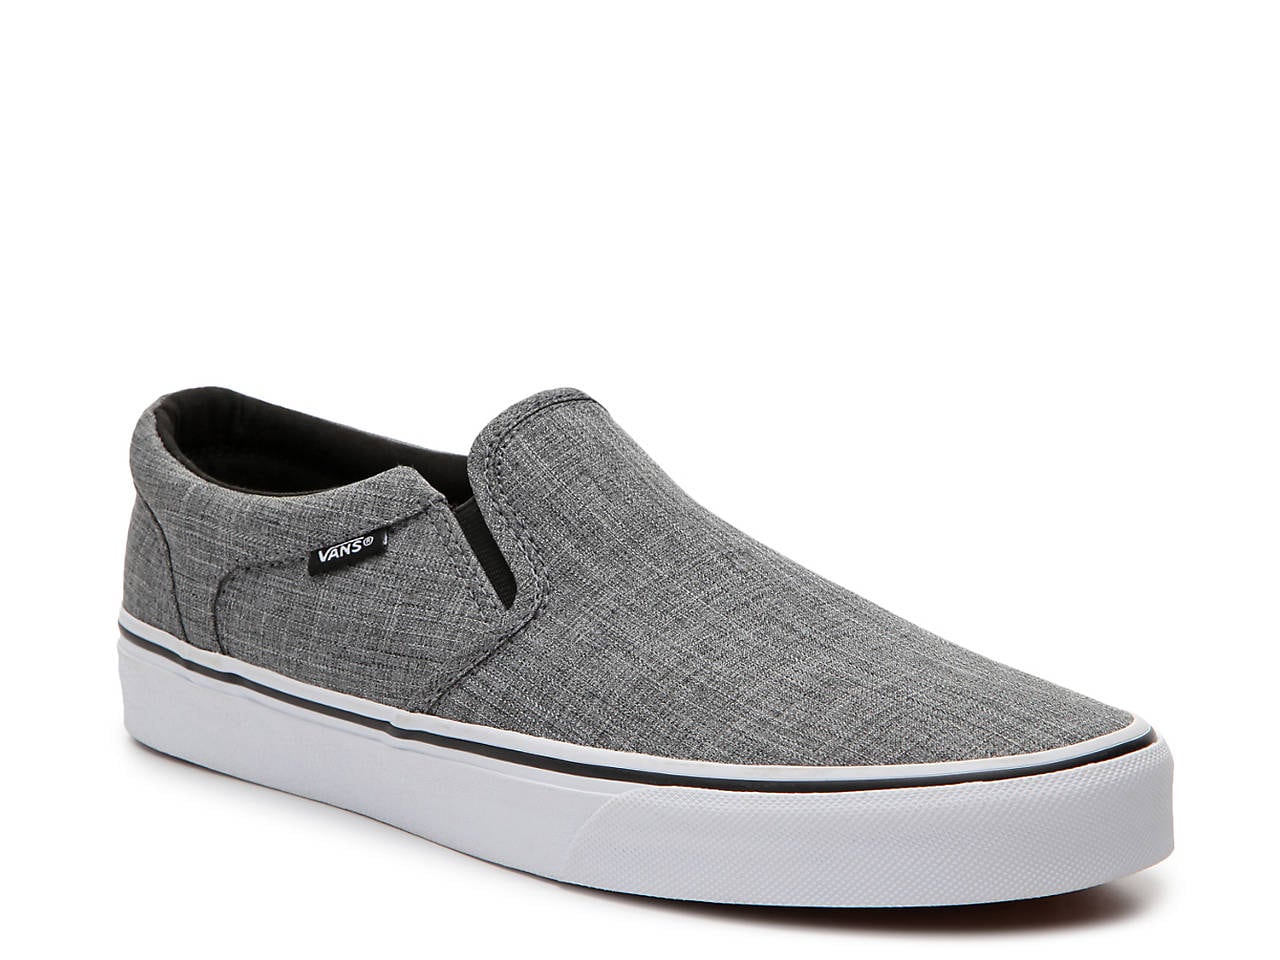 grey casual shoes